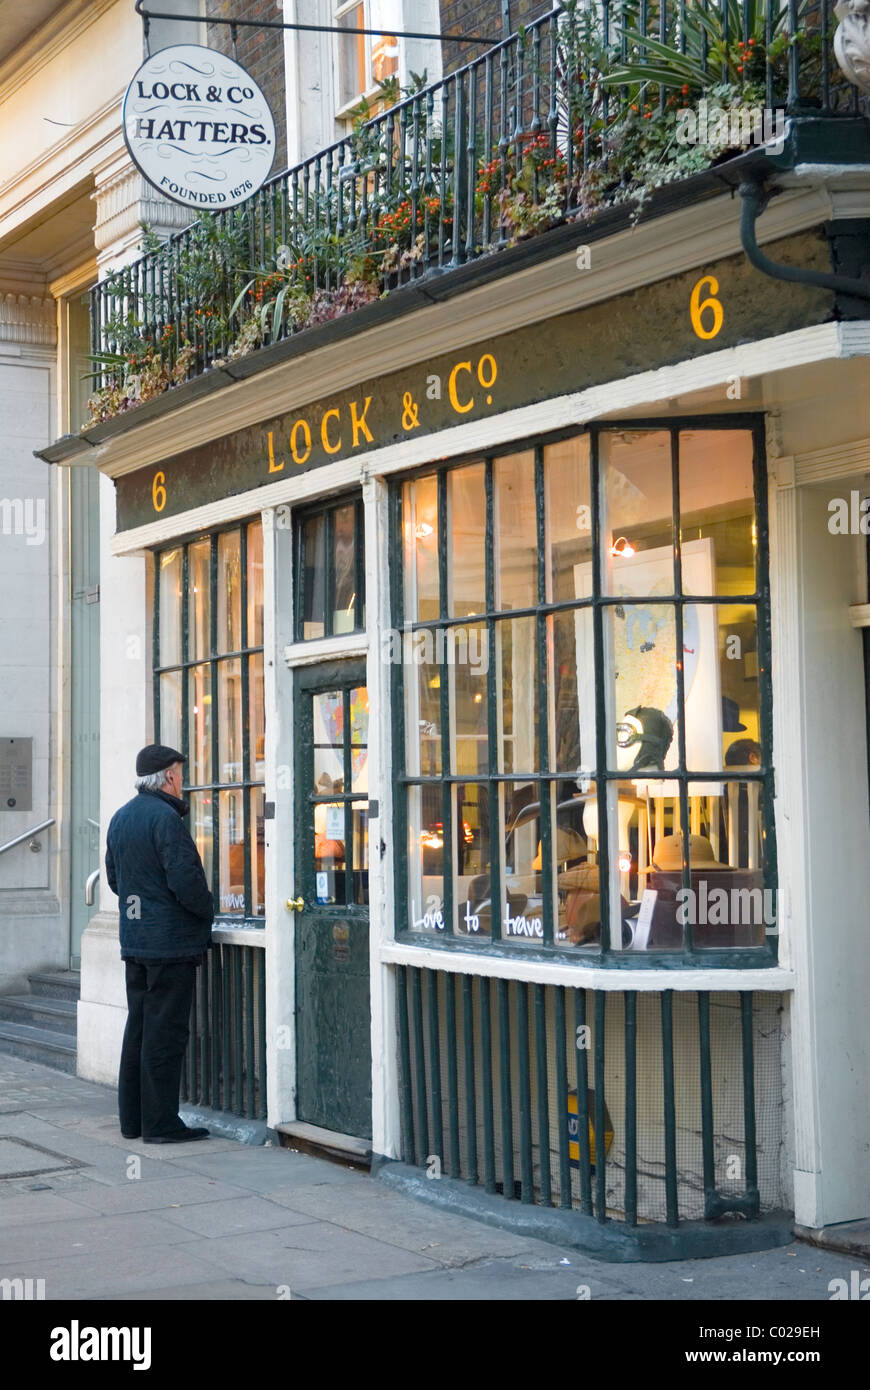 Lock and Co Hatters. 6 St James Street, London W1 Stock Photo